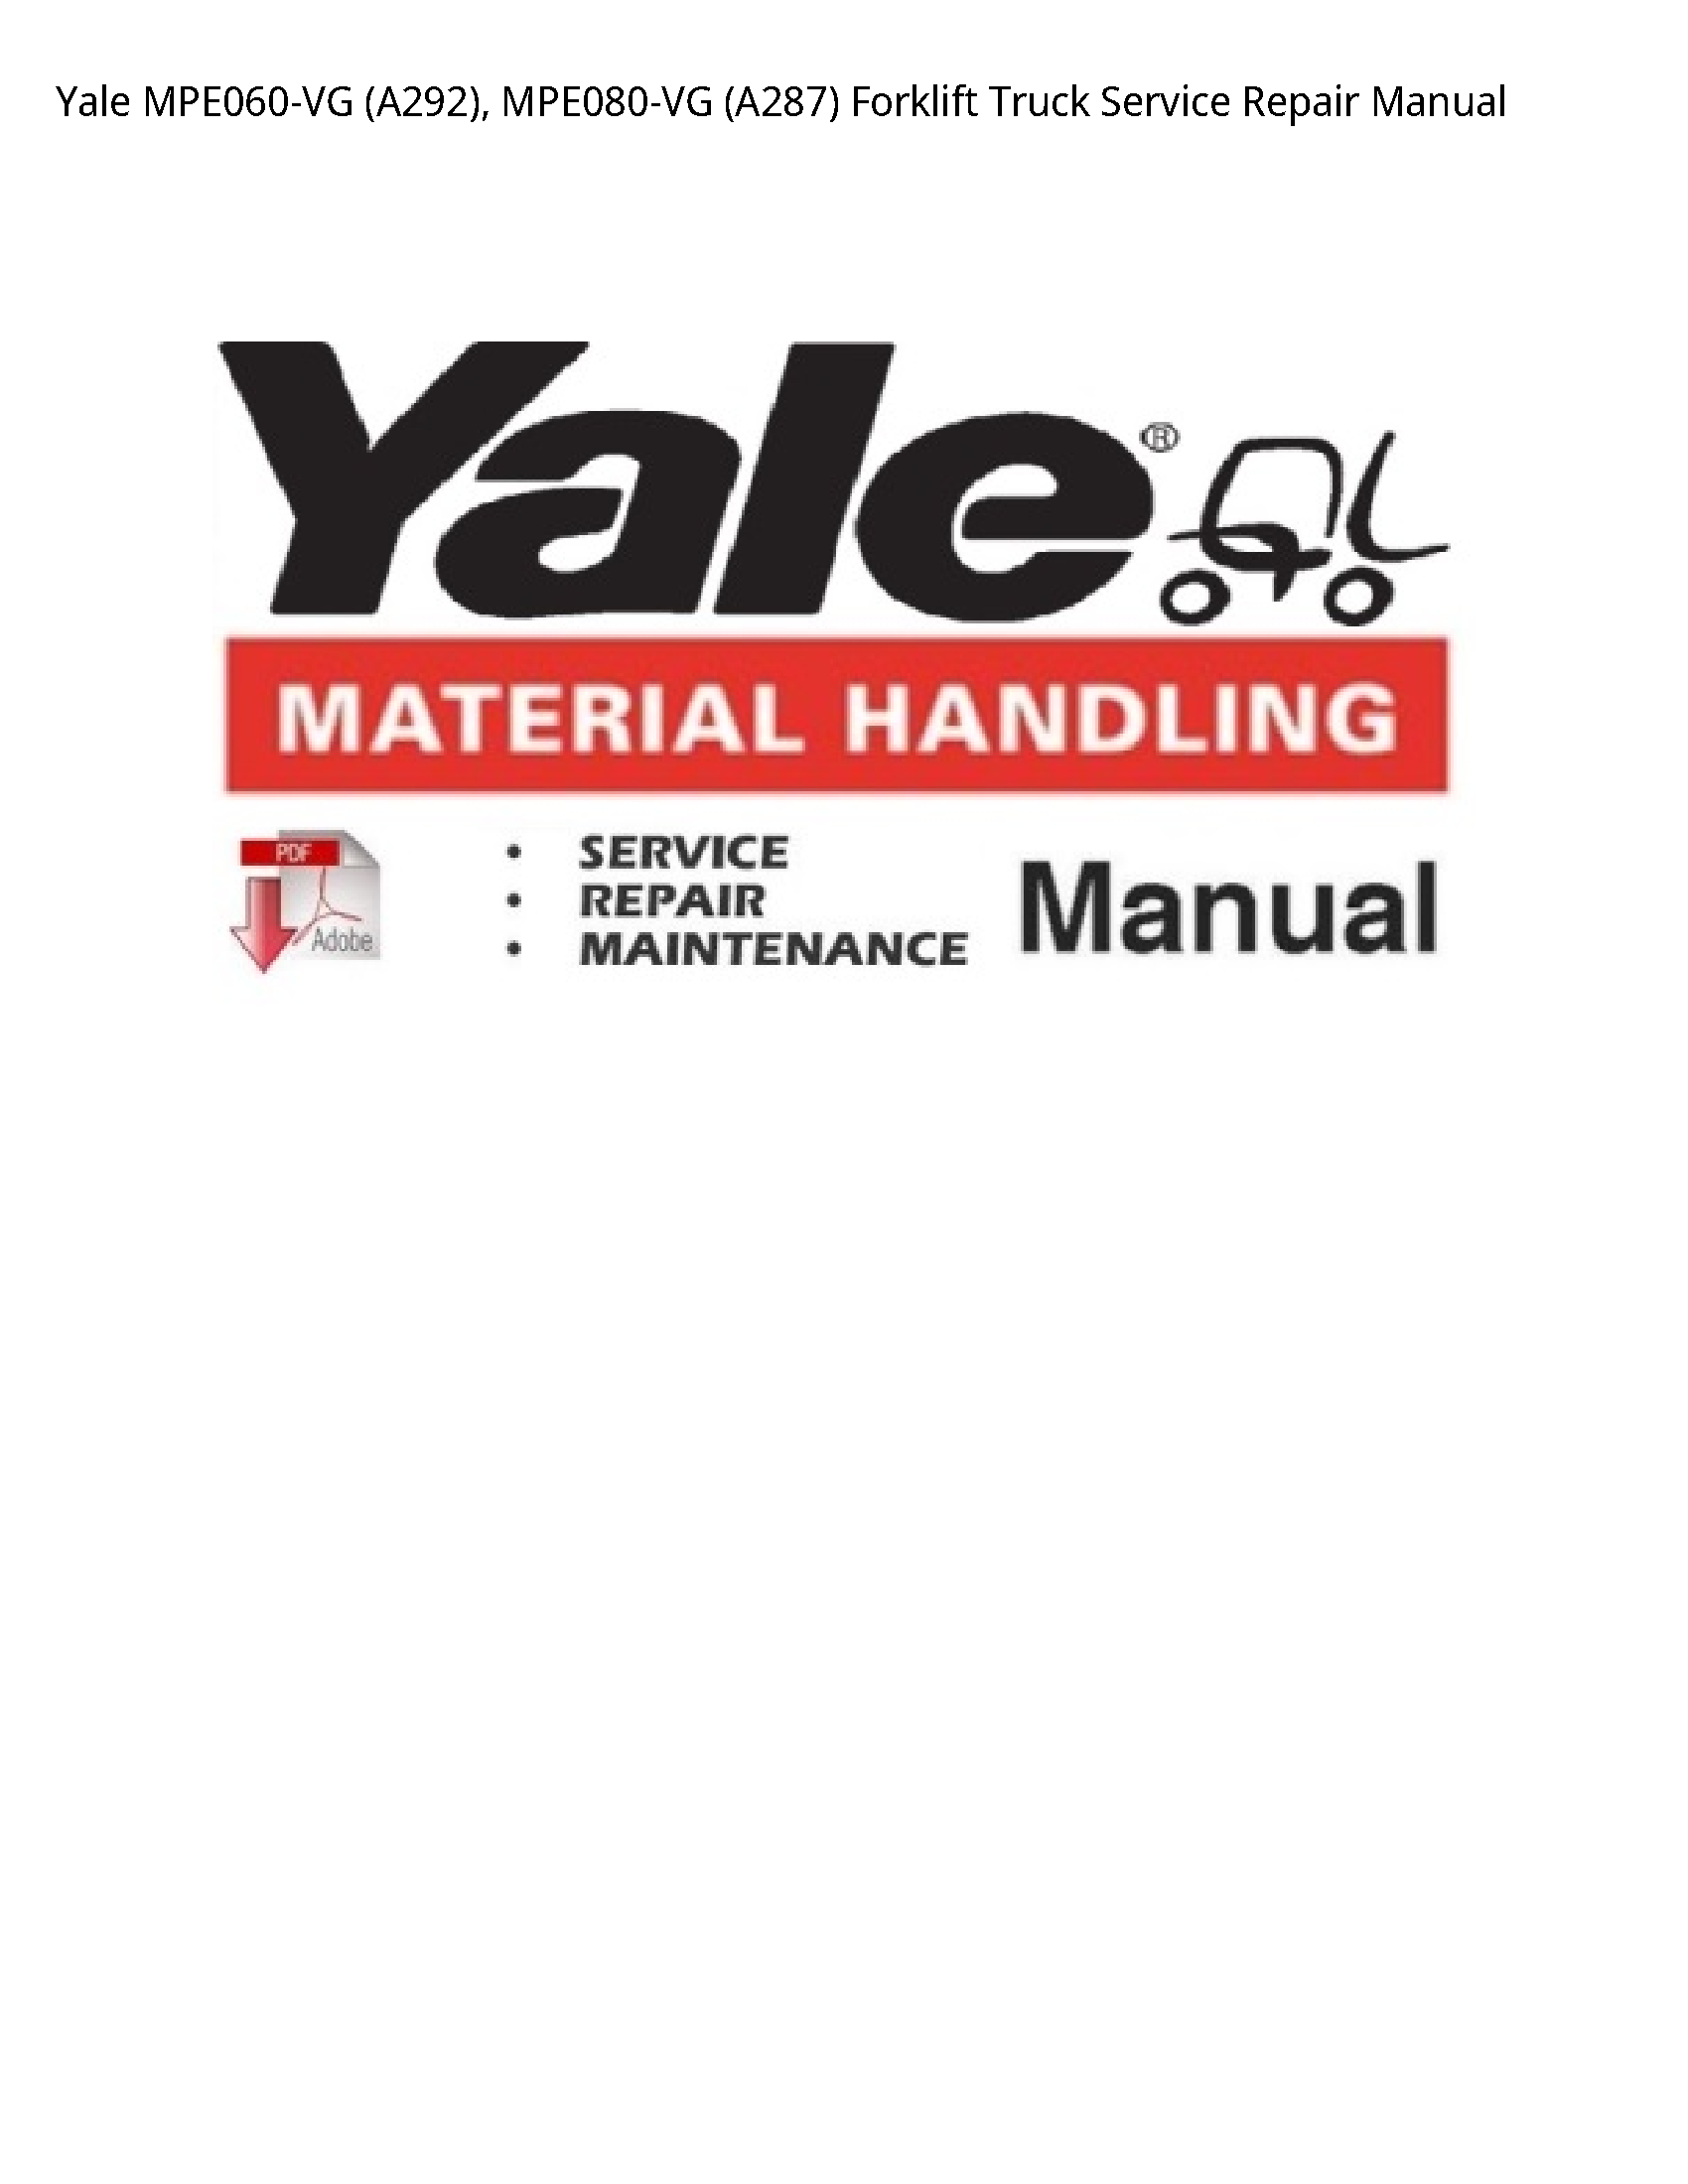 Yale MPE060-VG Forklift Truck manual